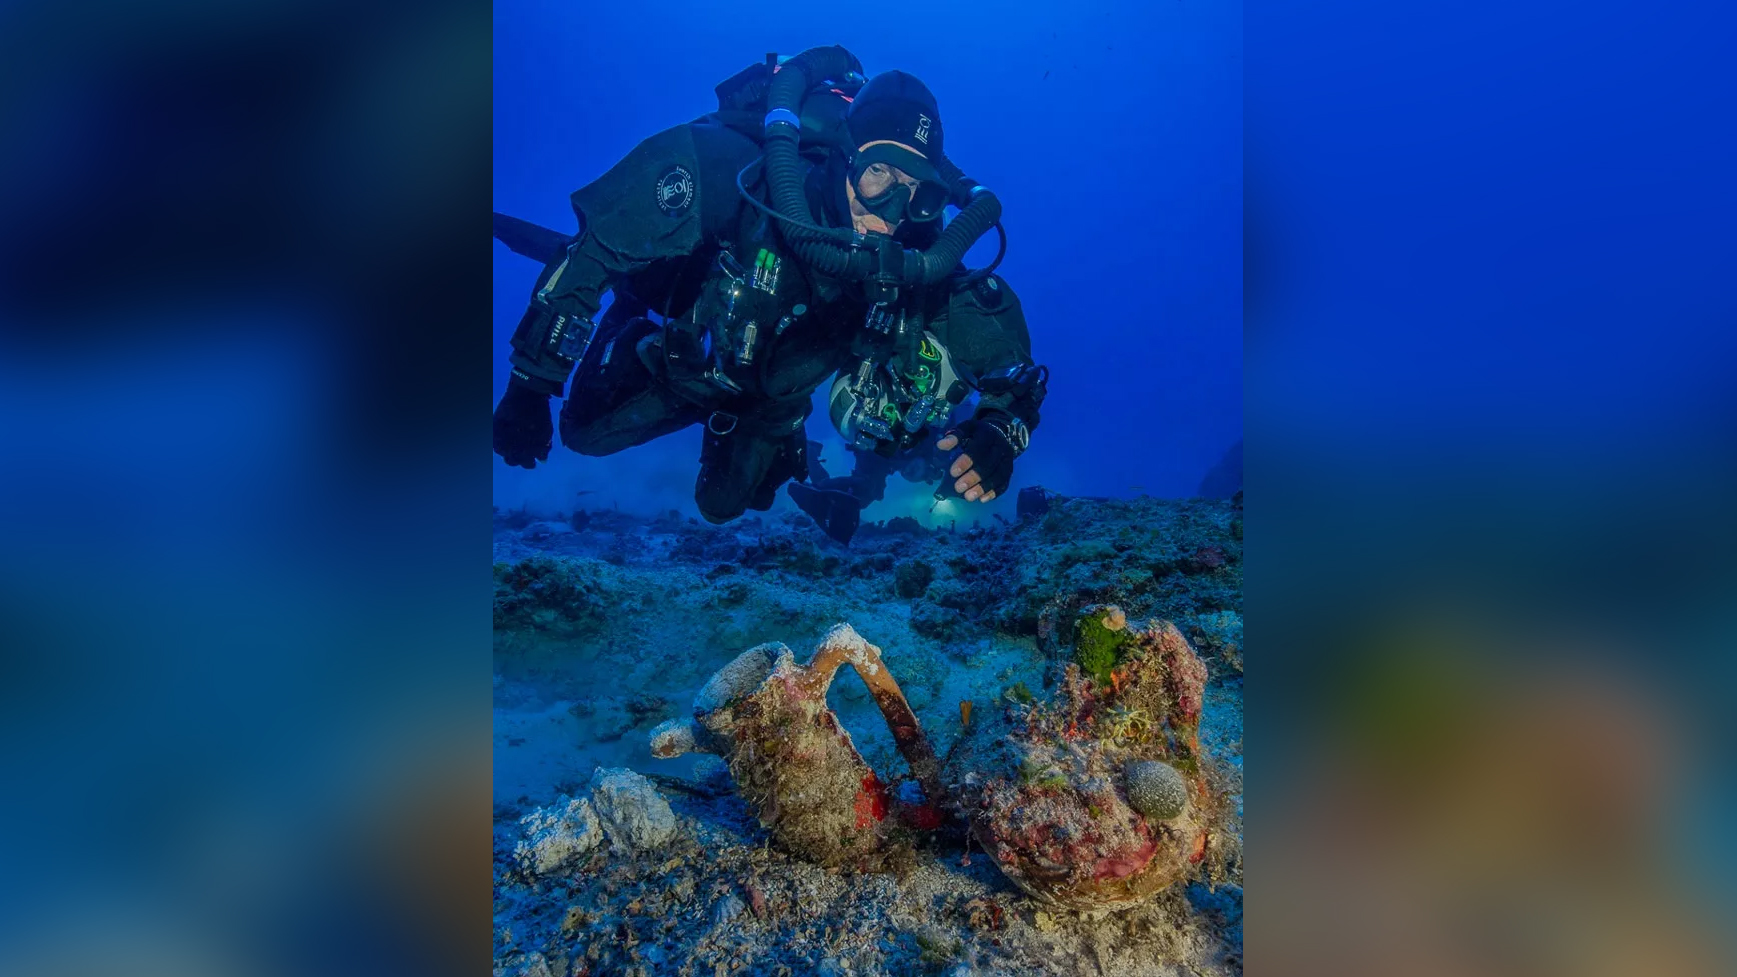 An archaeologist swims over artifacts at the site of the Antikythera shipwreck. The site is famed for the massive amount of artifacts discovered there. Case in point: In 2015, researchers pulled up 50 objects from the depths as part of their scientific excavation of the Antikythera wreck site.